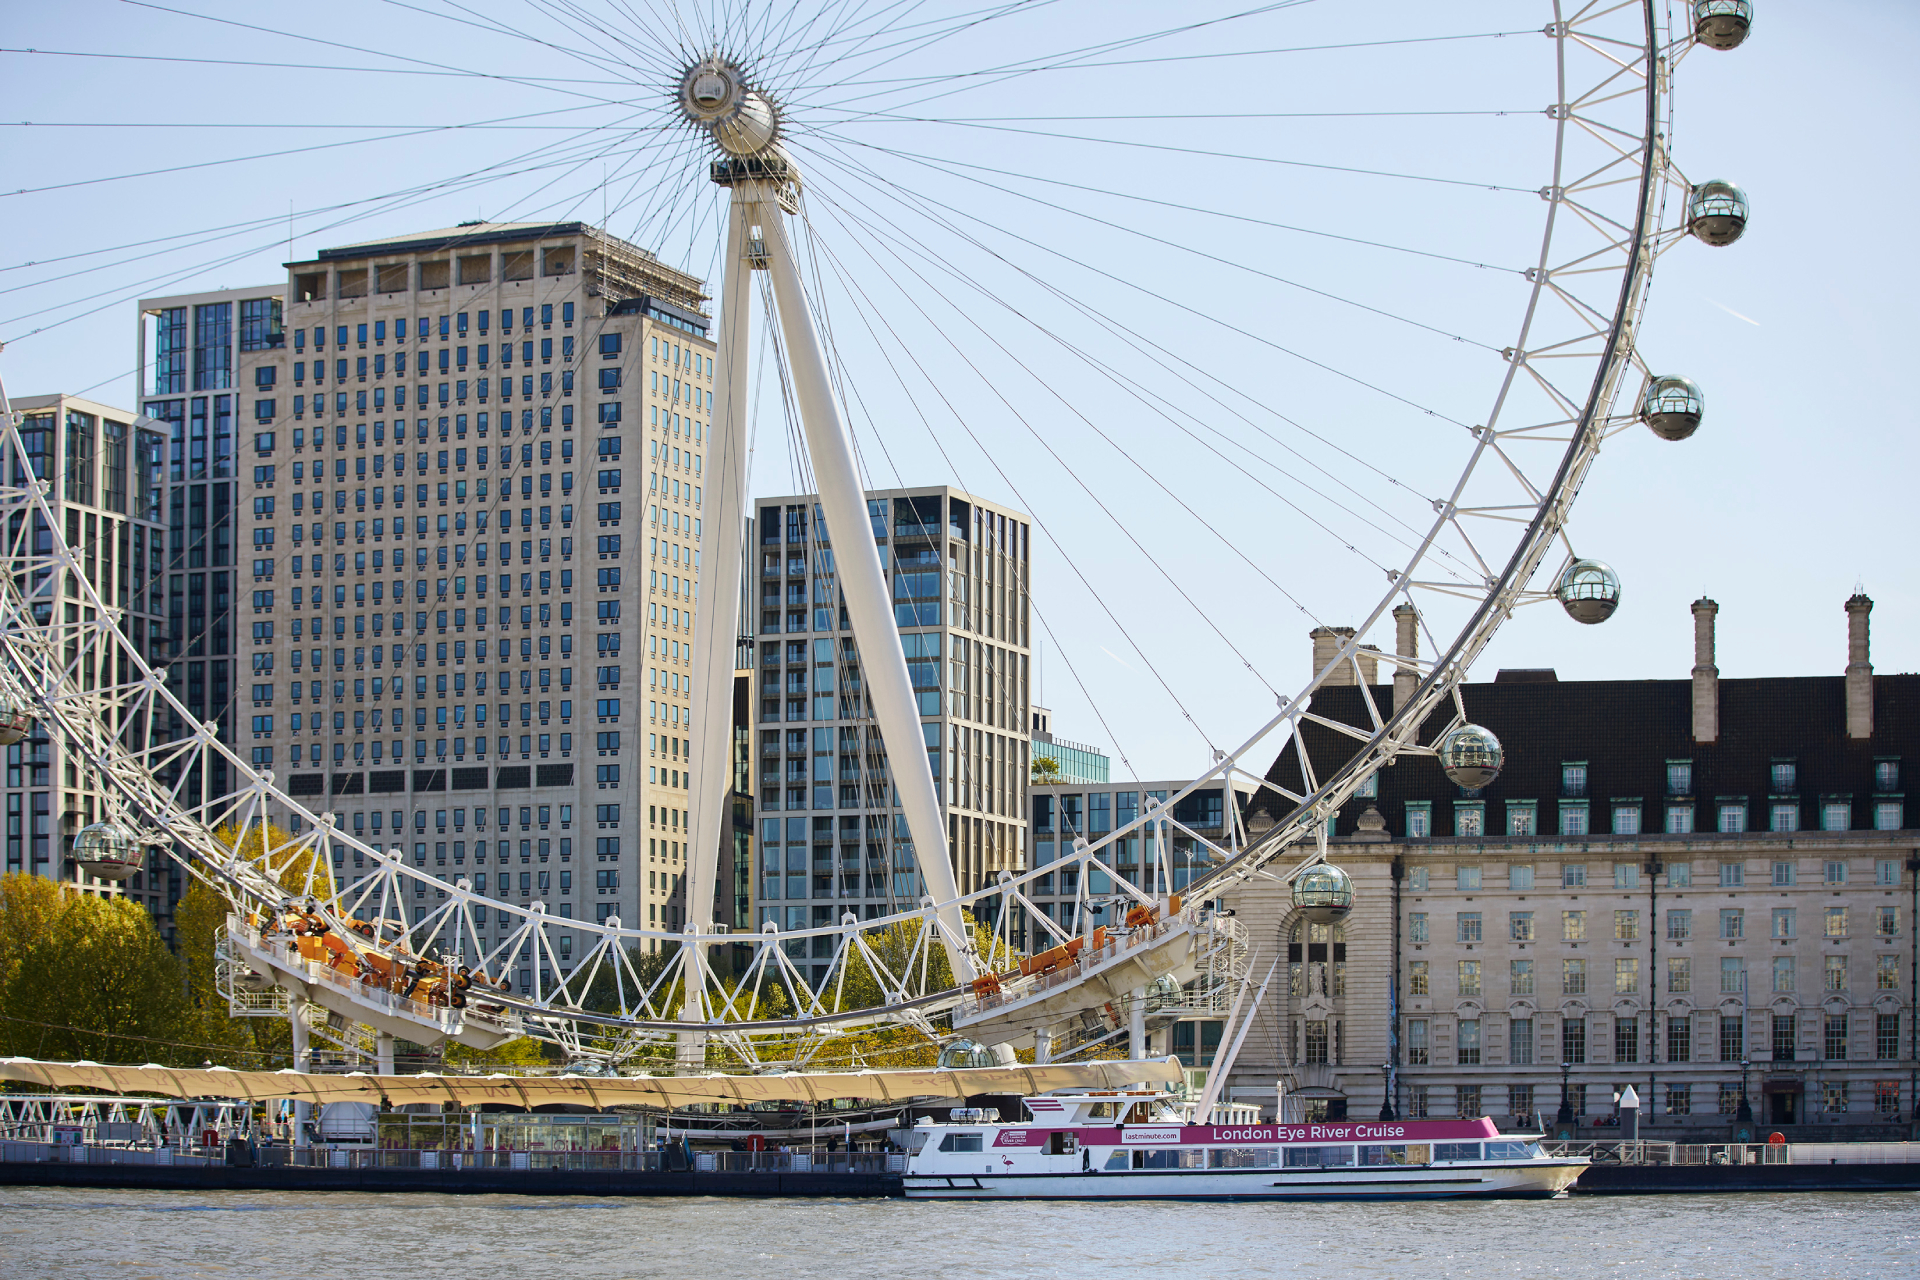 A picture of the London Eye River Cruise.